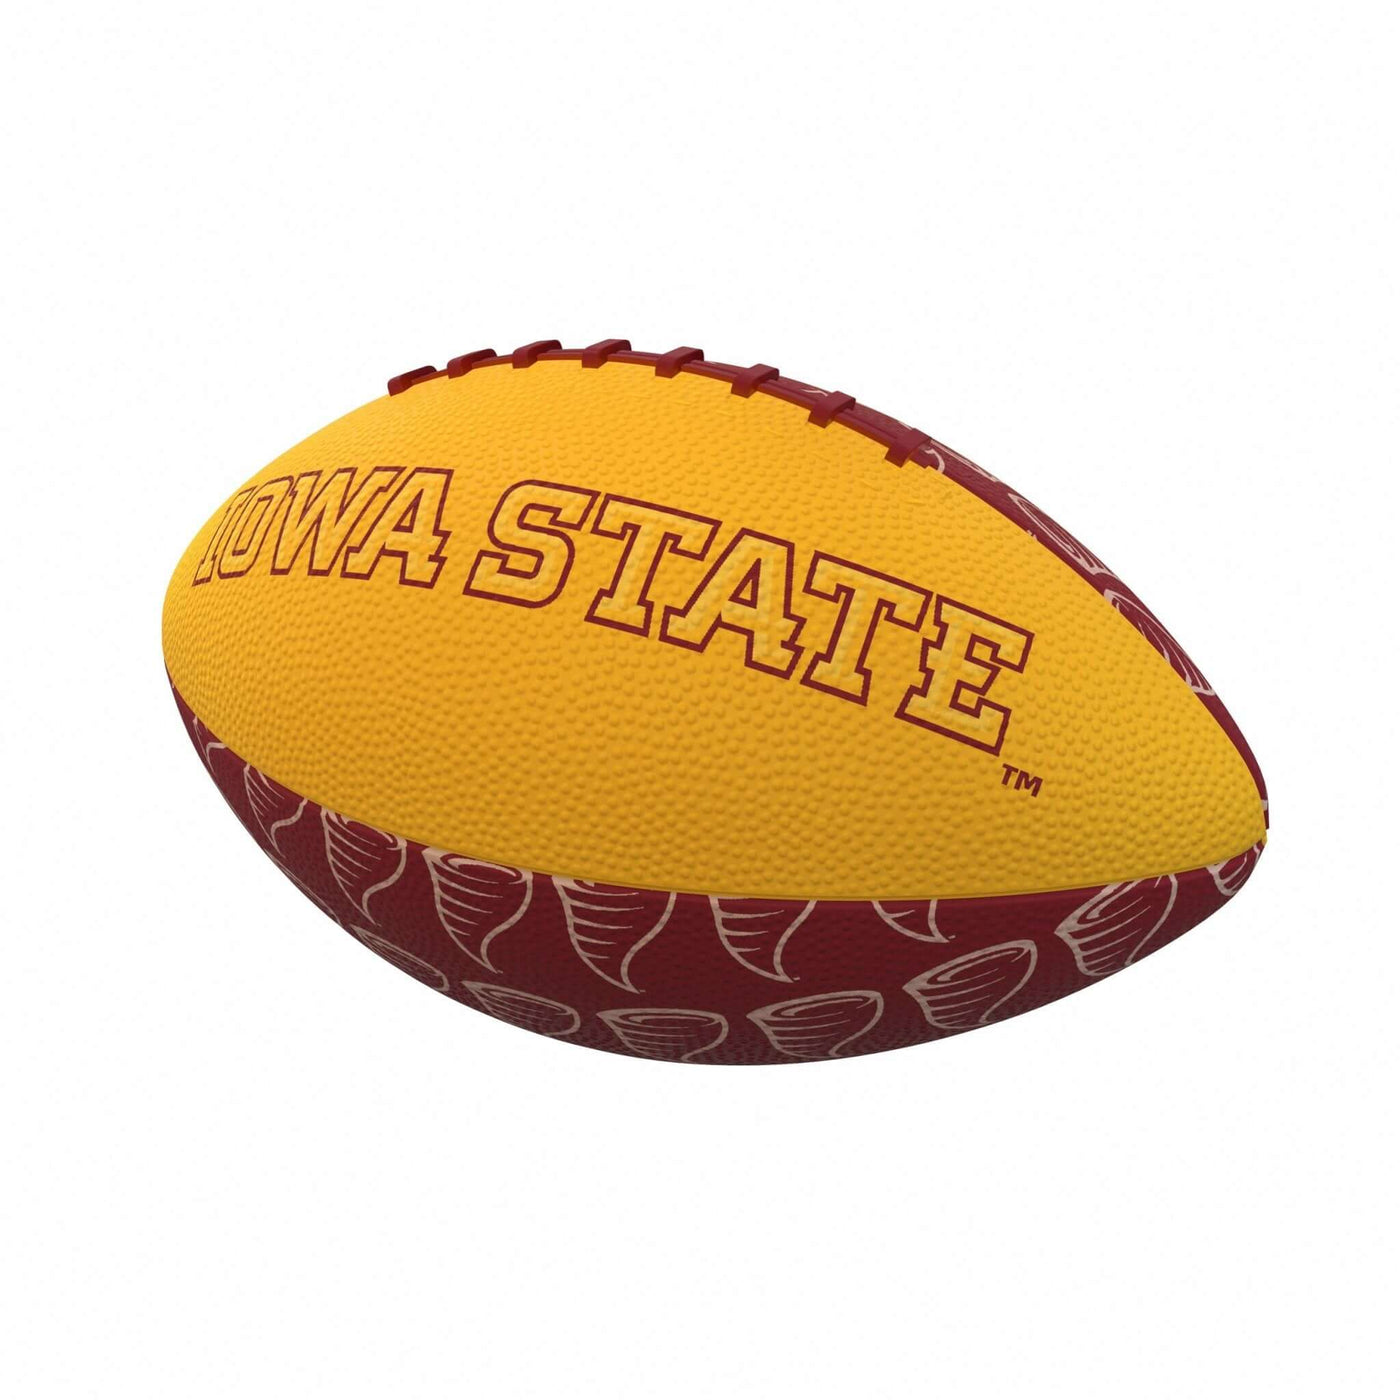 IA State Repeating Mini-Size Rubber Football - Logo Brands